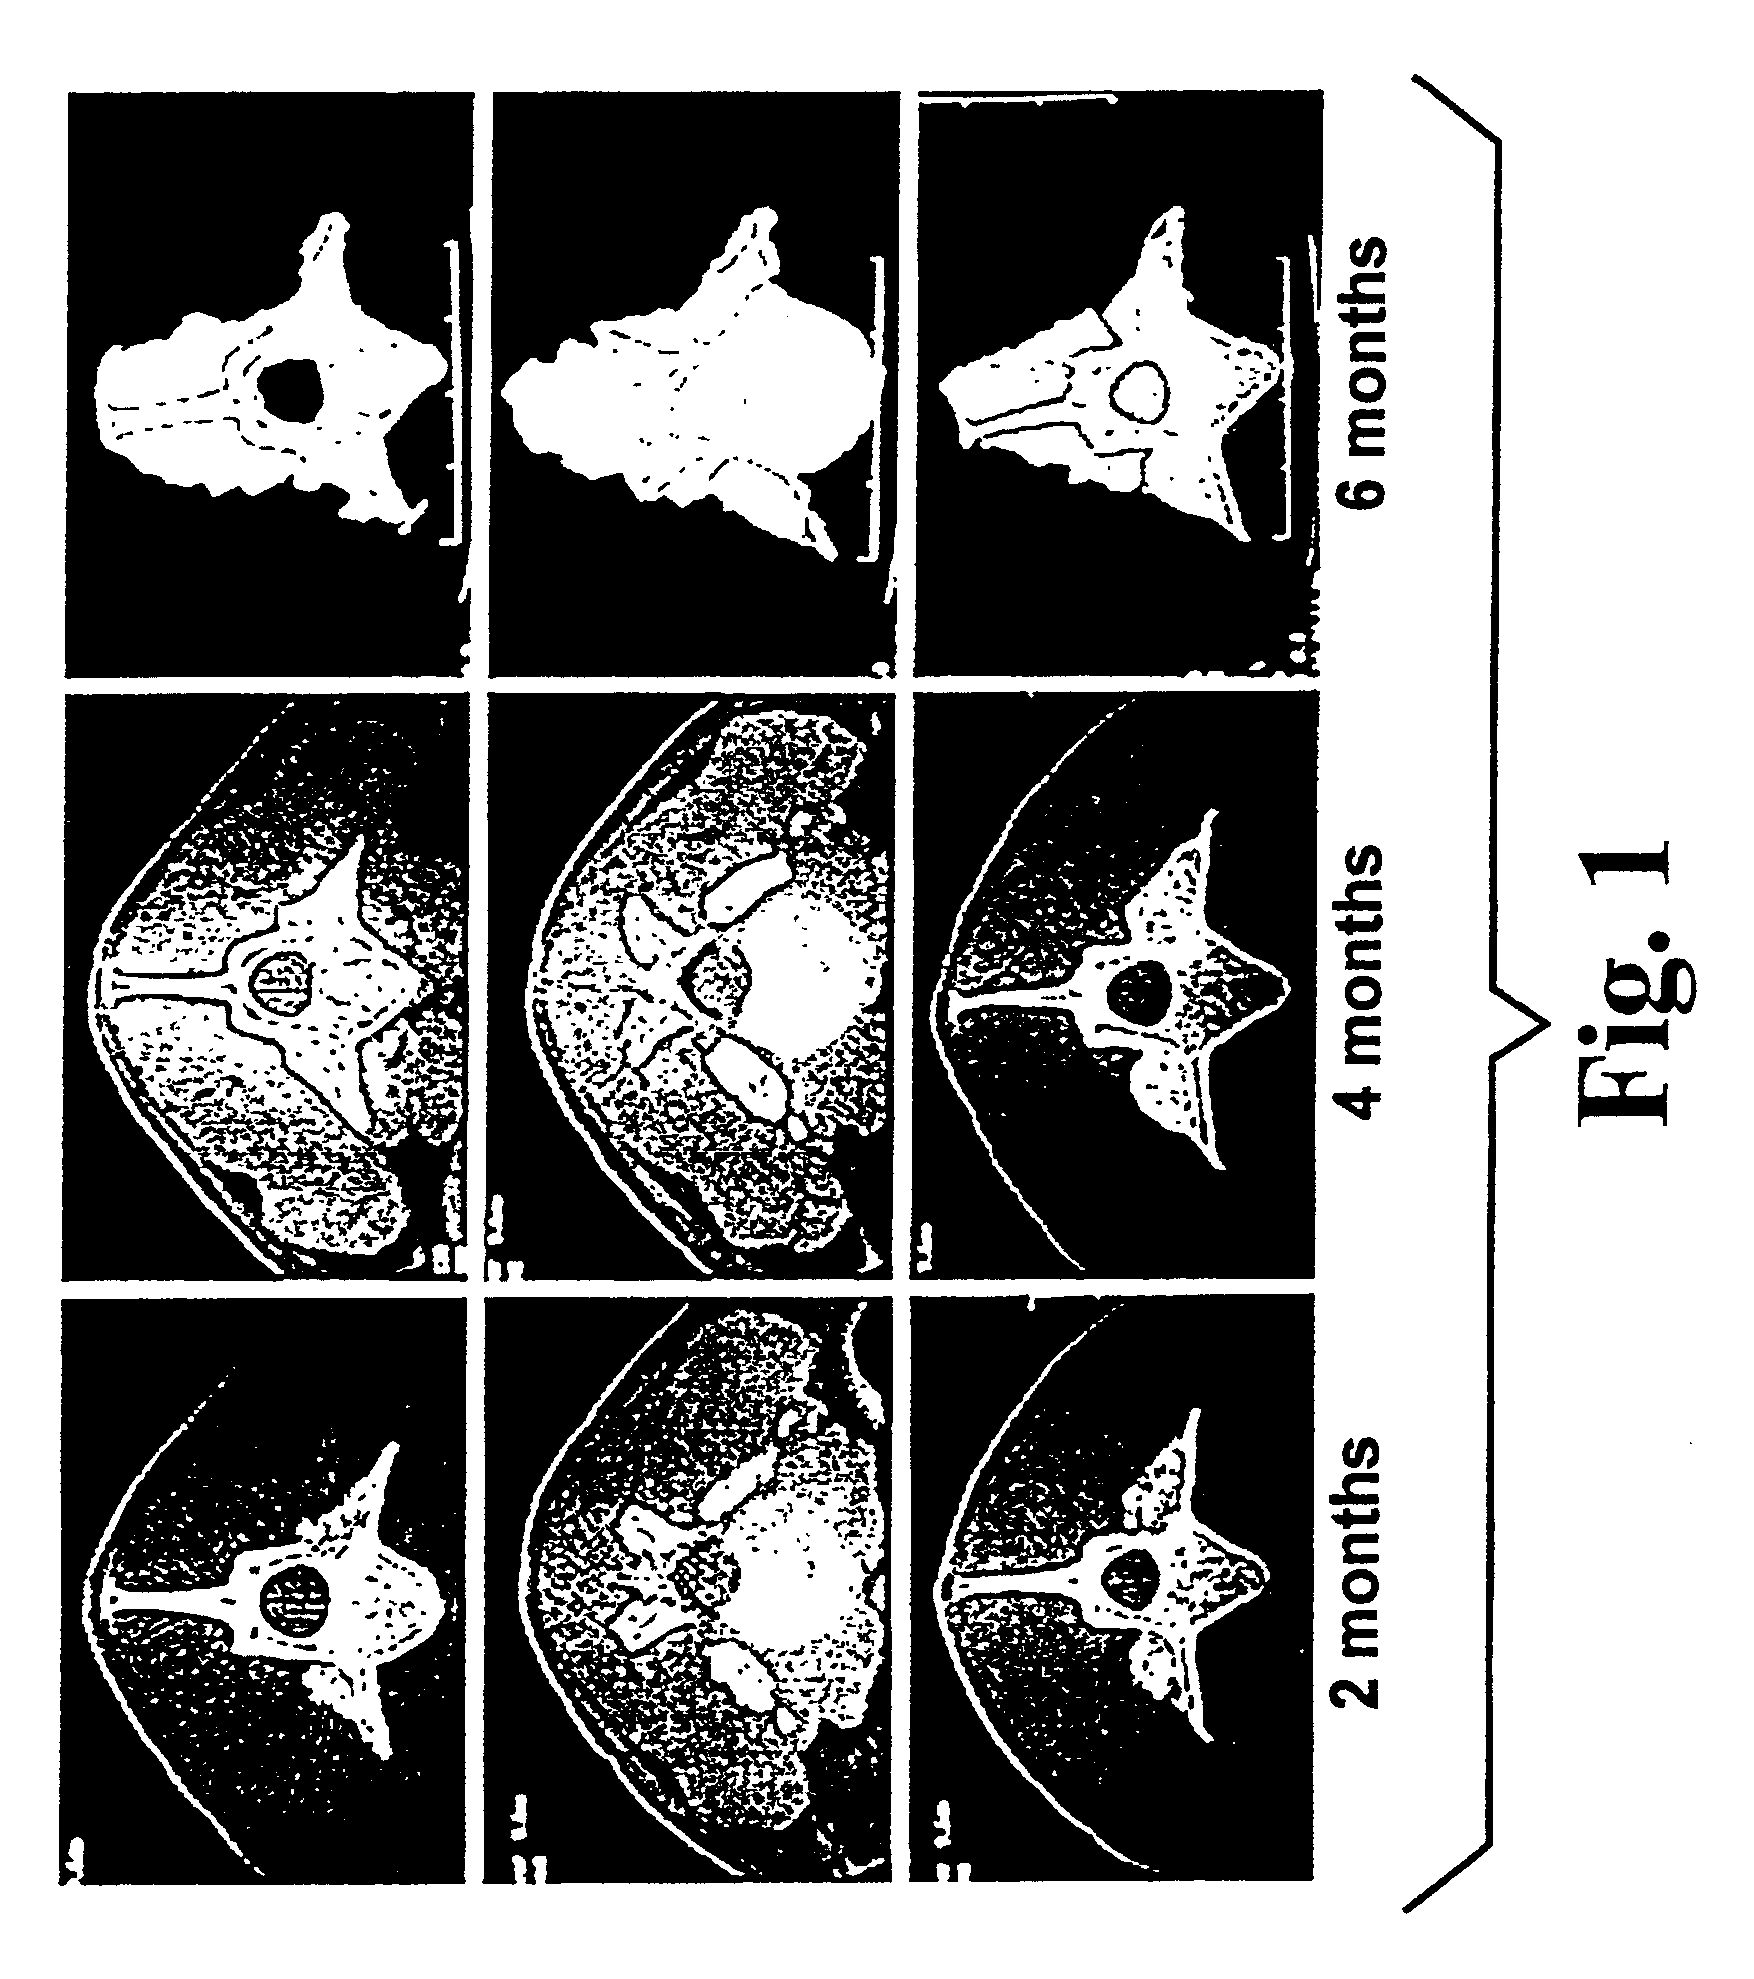 Highly-mineralized osteogenic sponge compositions and uses thereof